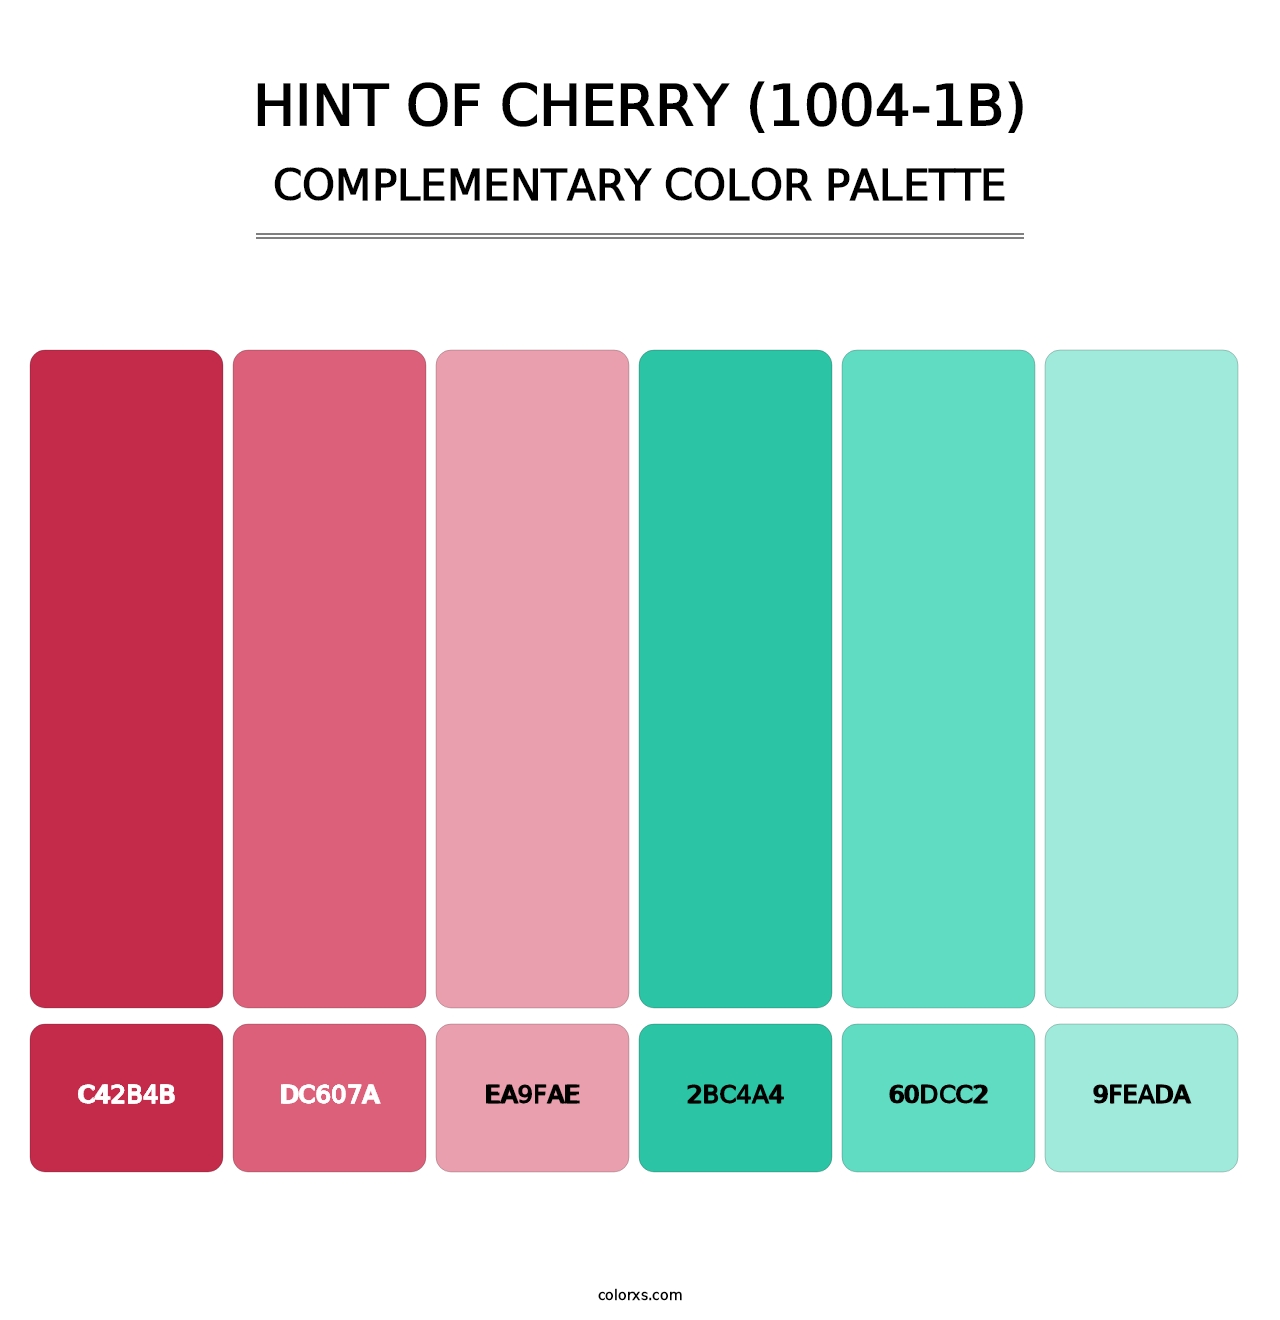 Hint of Cherry (1004-1B) - Complementary Color Palette